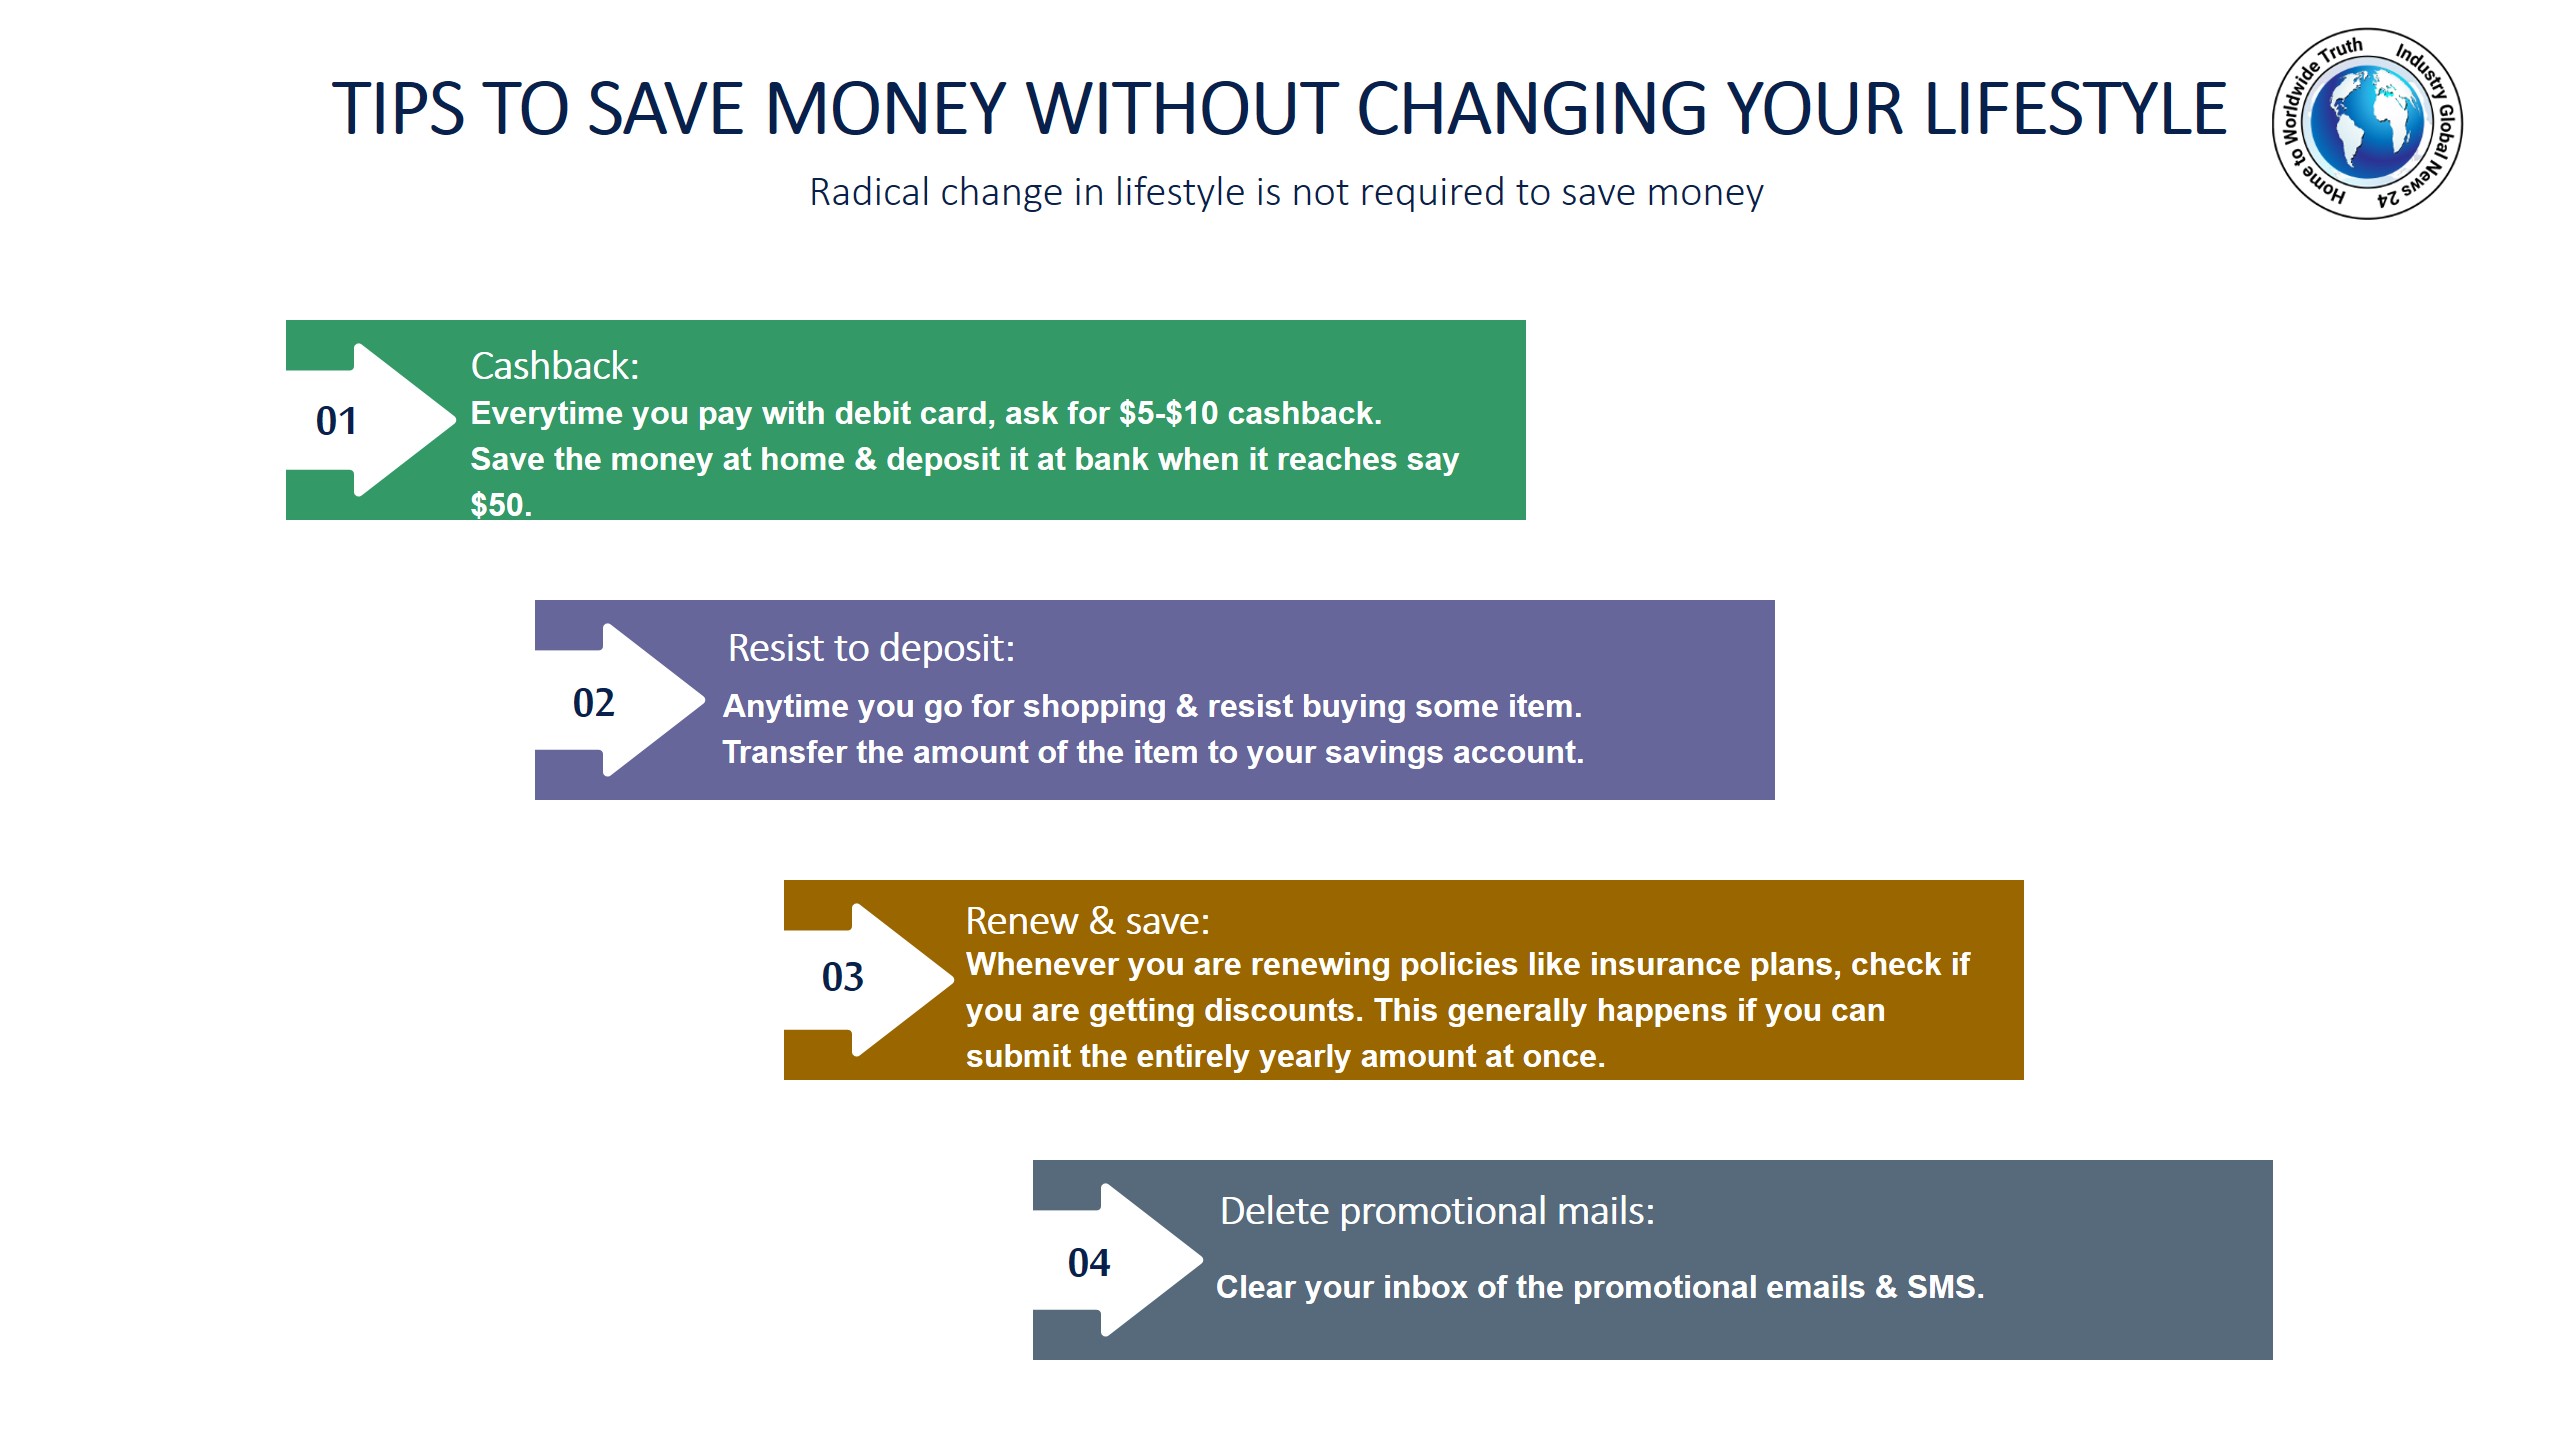 Tips to save money without changing your lifestyle